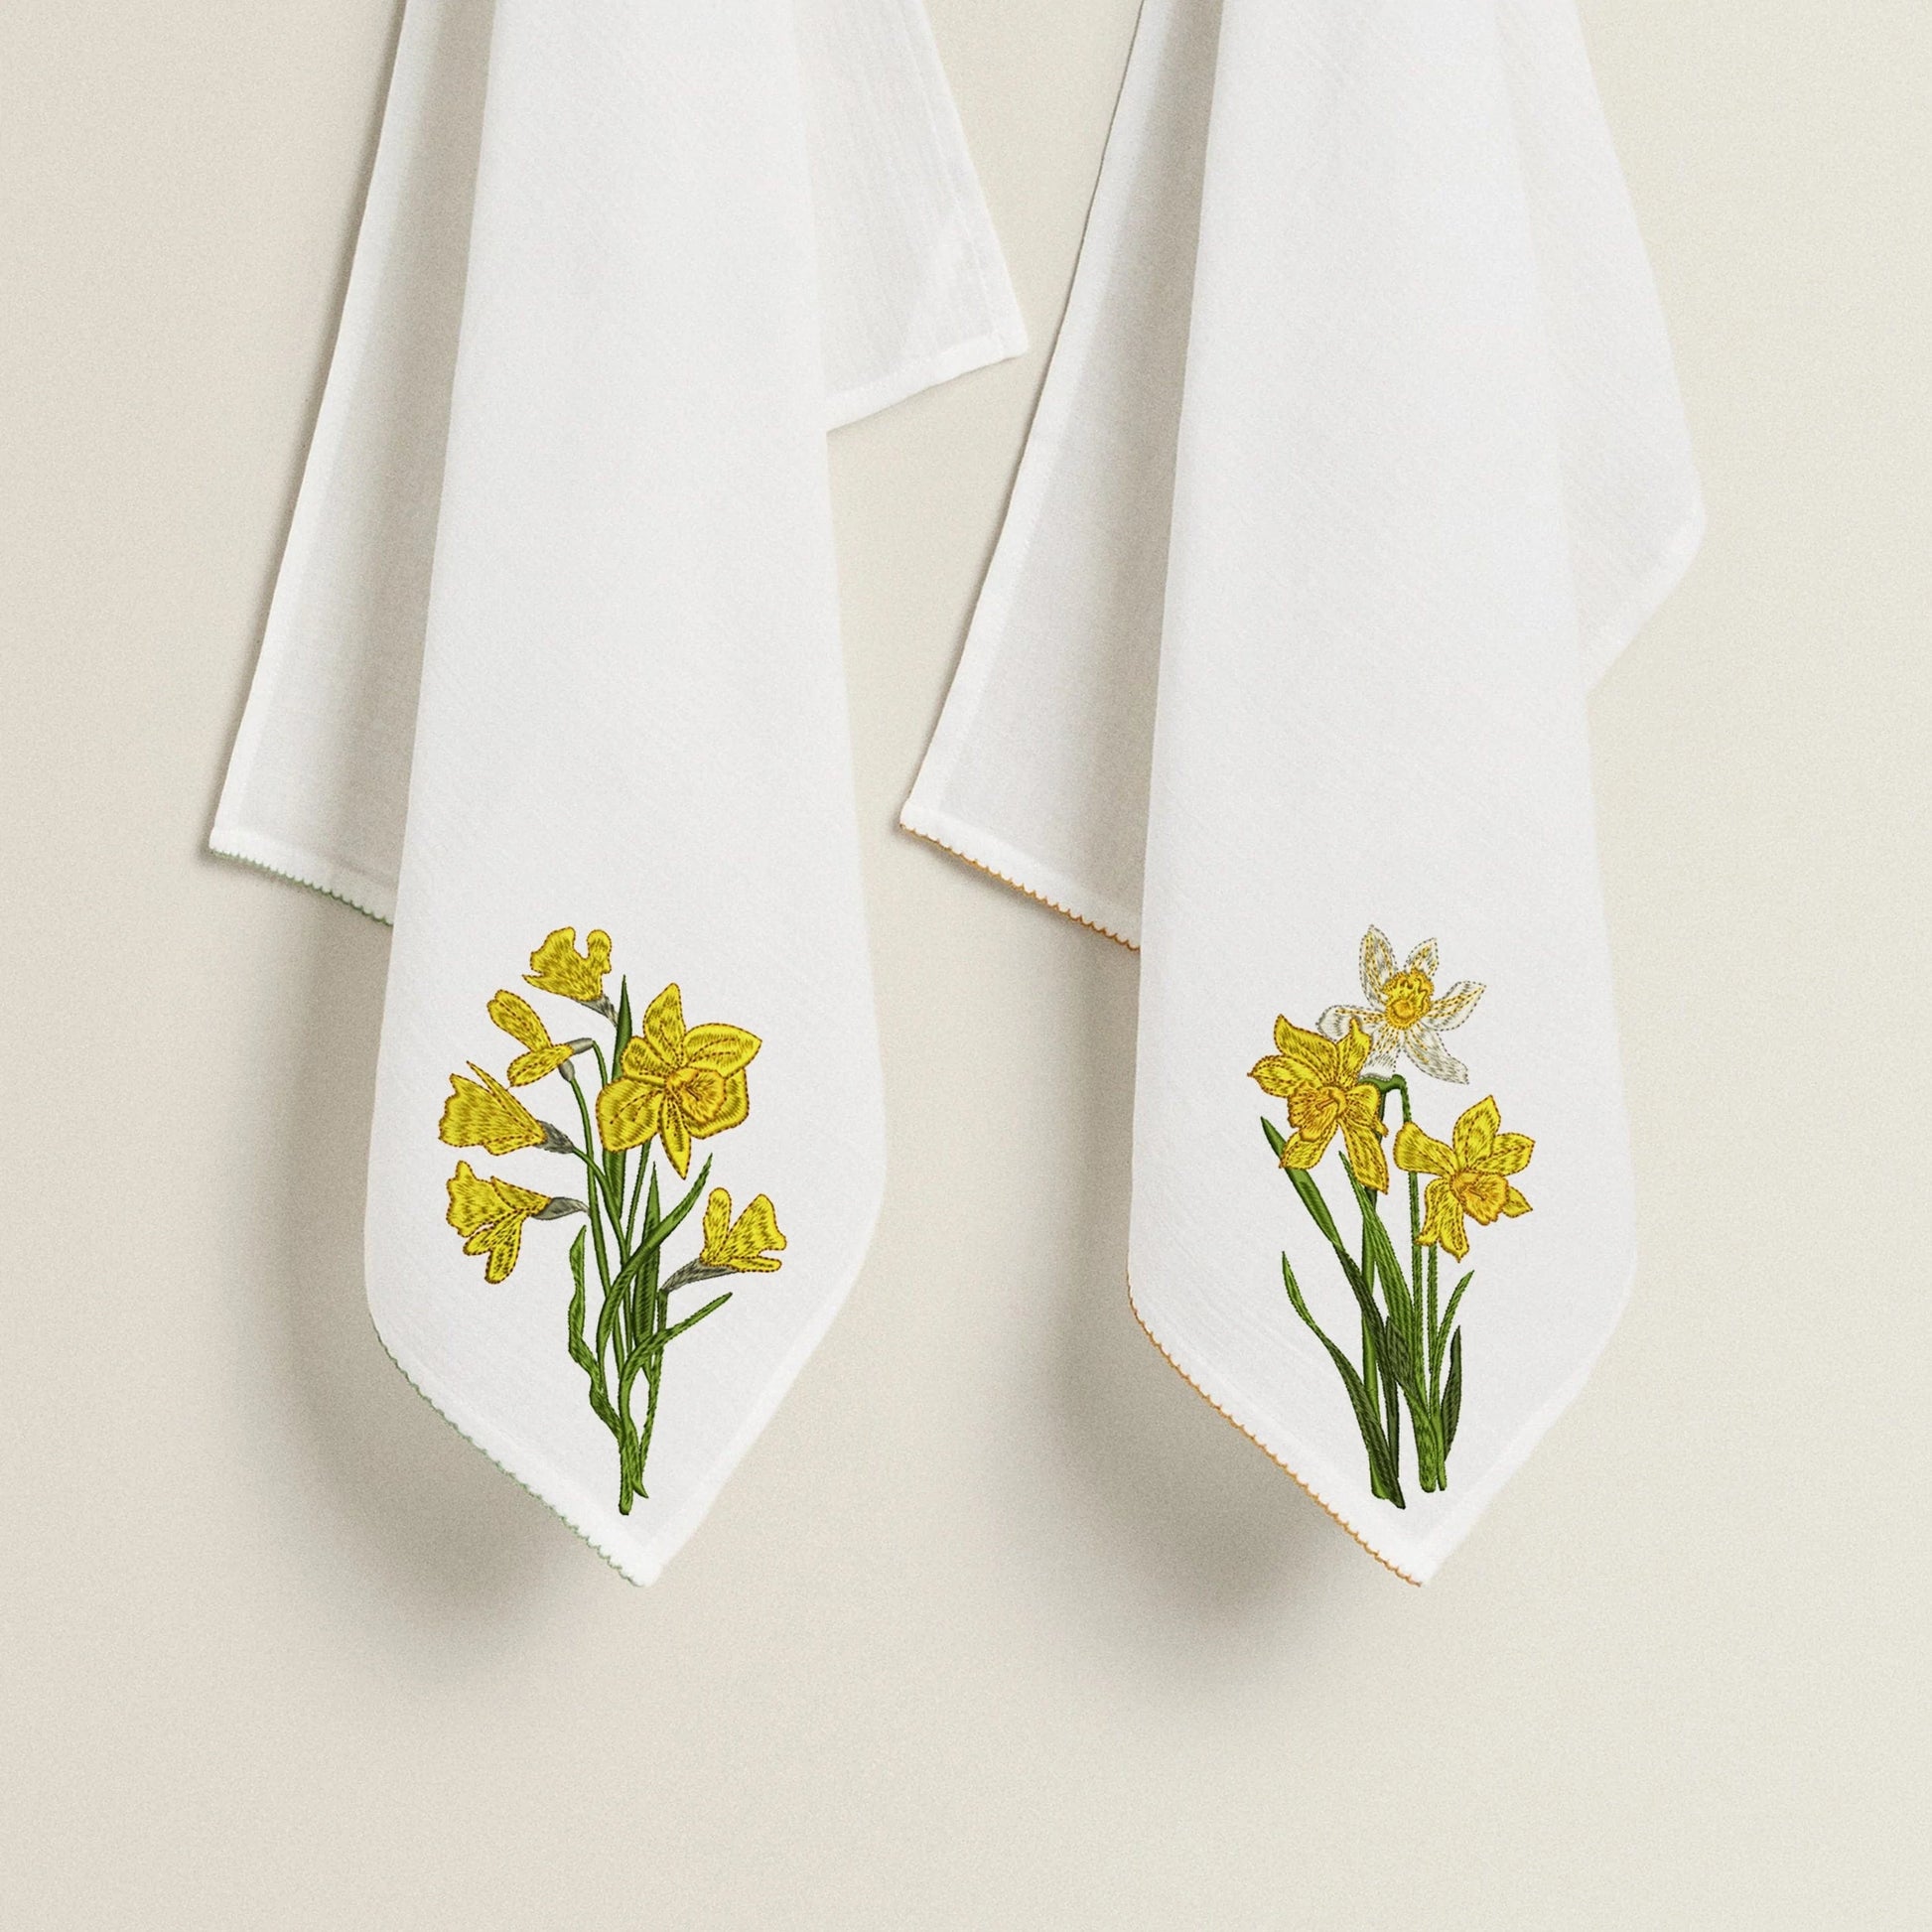 Daffodil Spring Narcissus Flowers machine embroidery design on towel